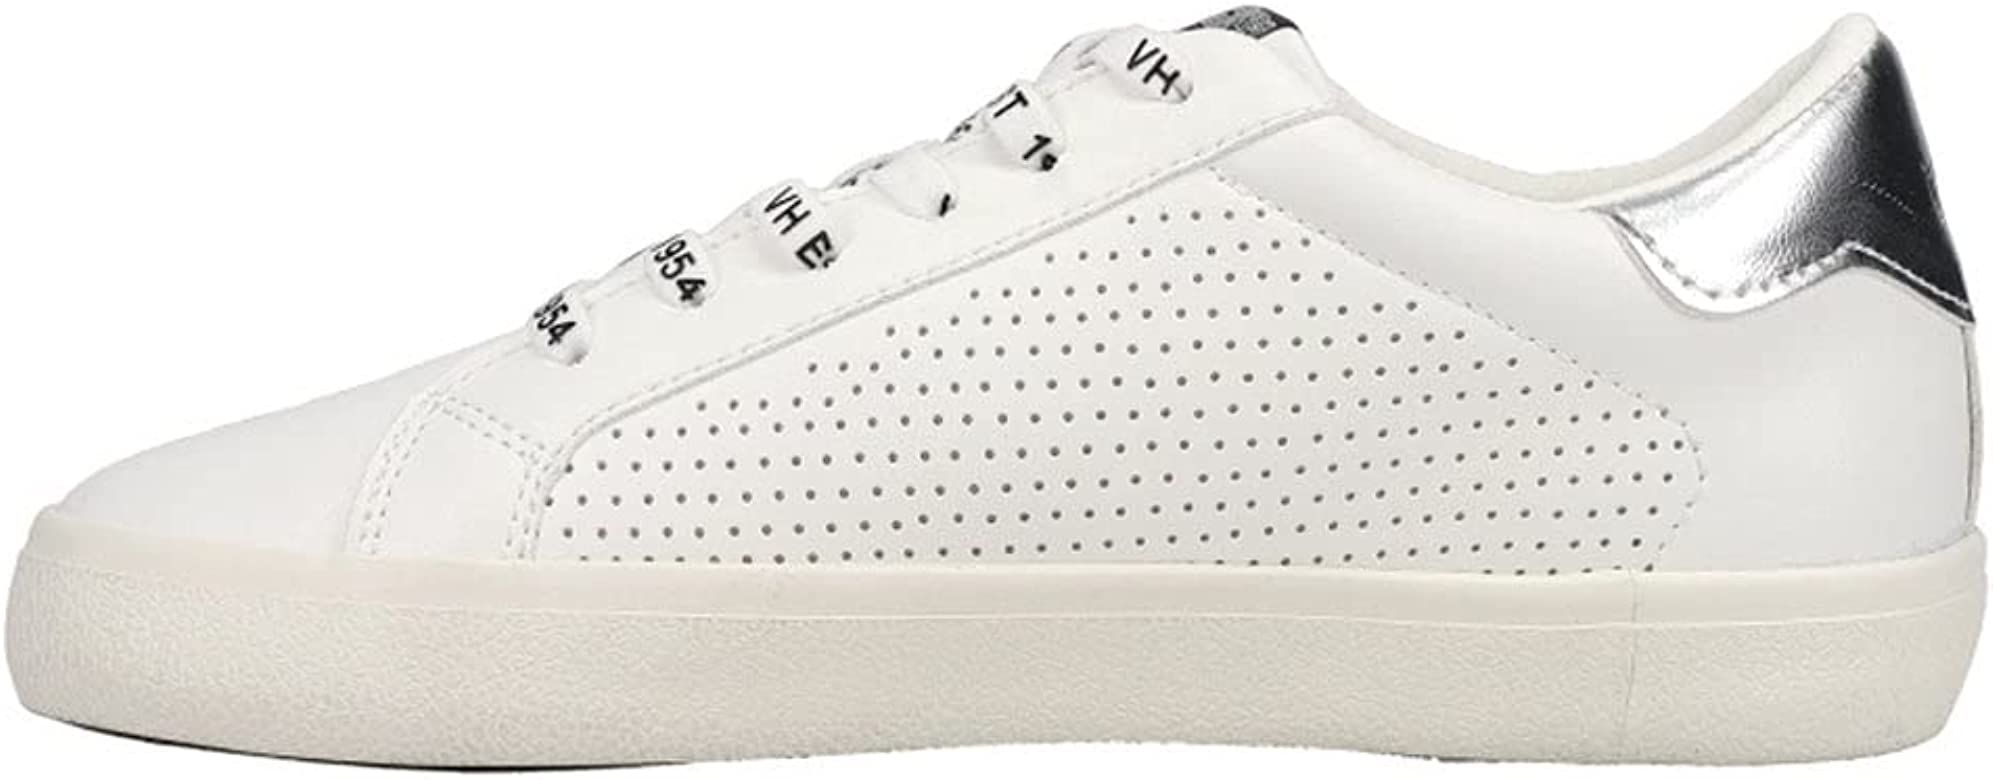 VINTAGE HAVANA Womens Gadol Perforated Slip On Sneakers Shoes Casual - White | Amazon (US)